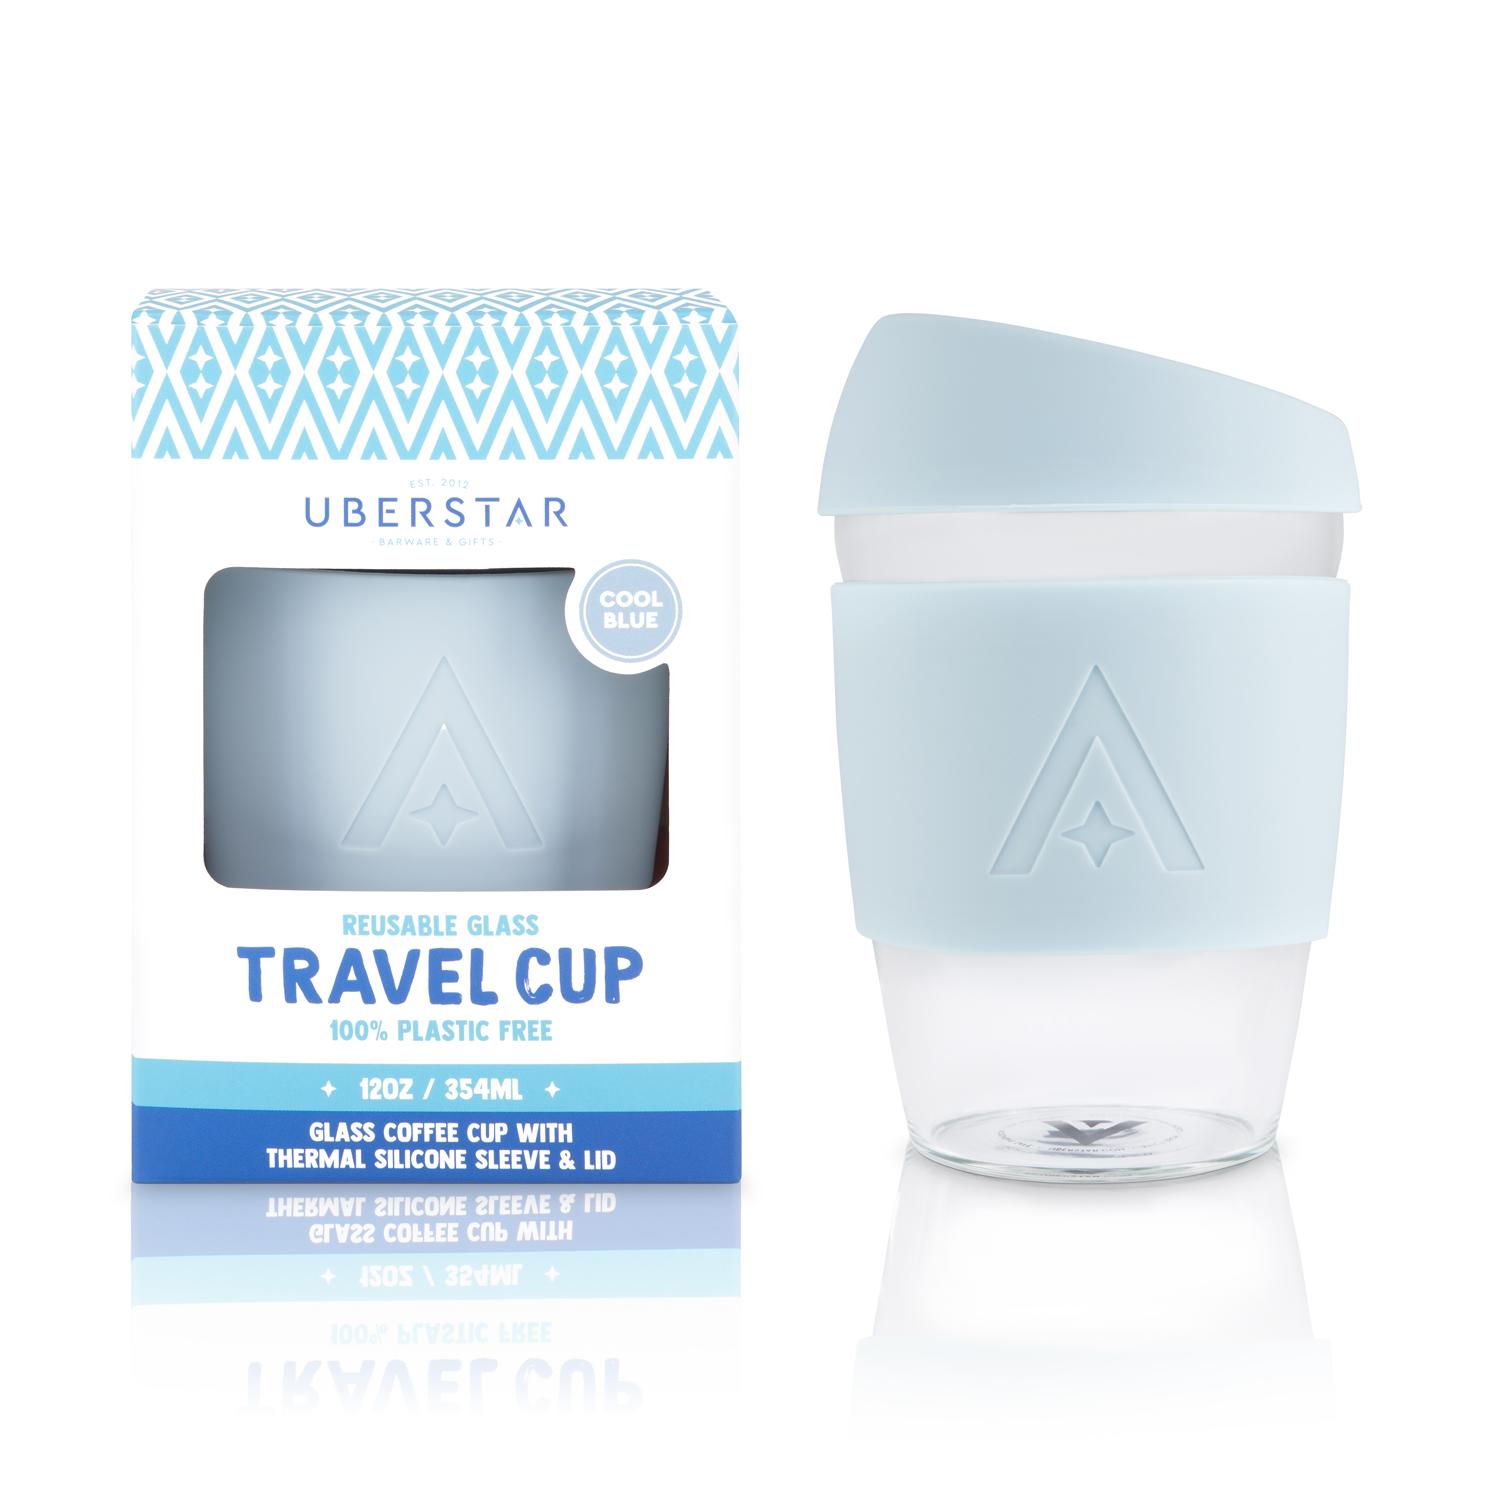 Uberstar Reusable Glass Travel Cup - Cool Blue - Only £14.99